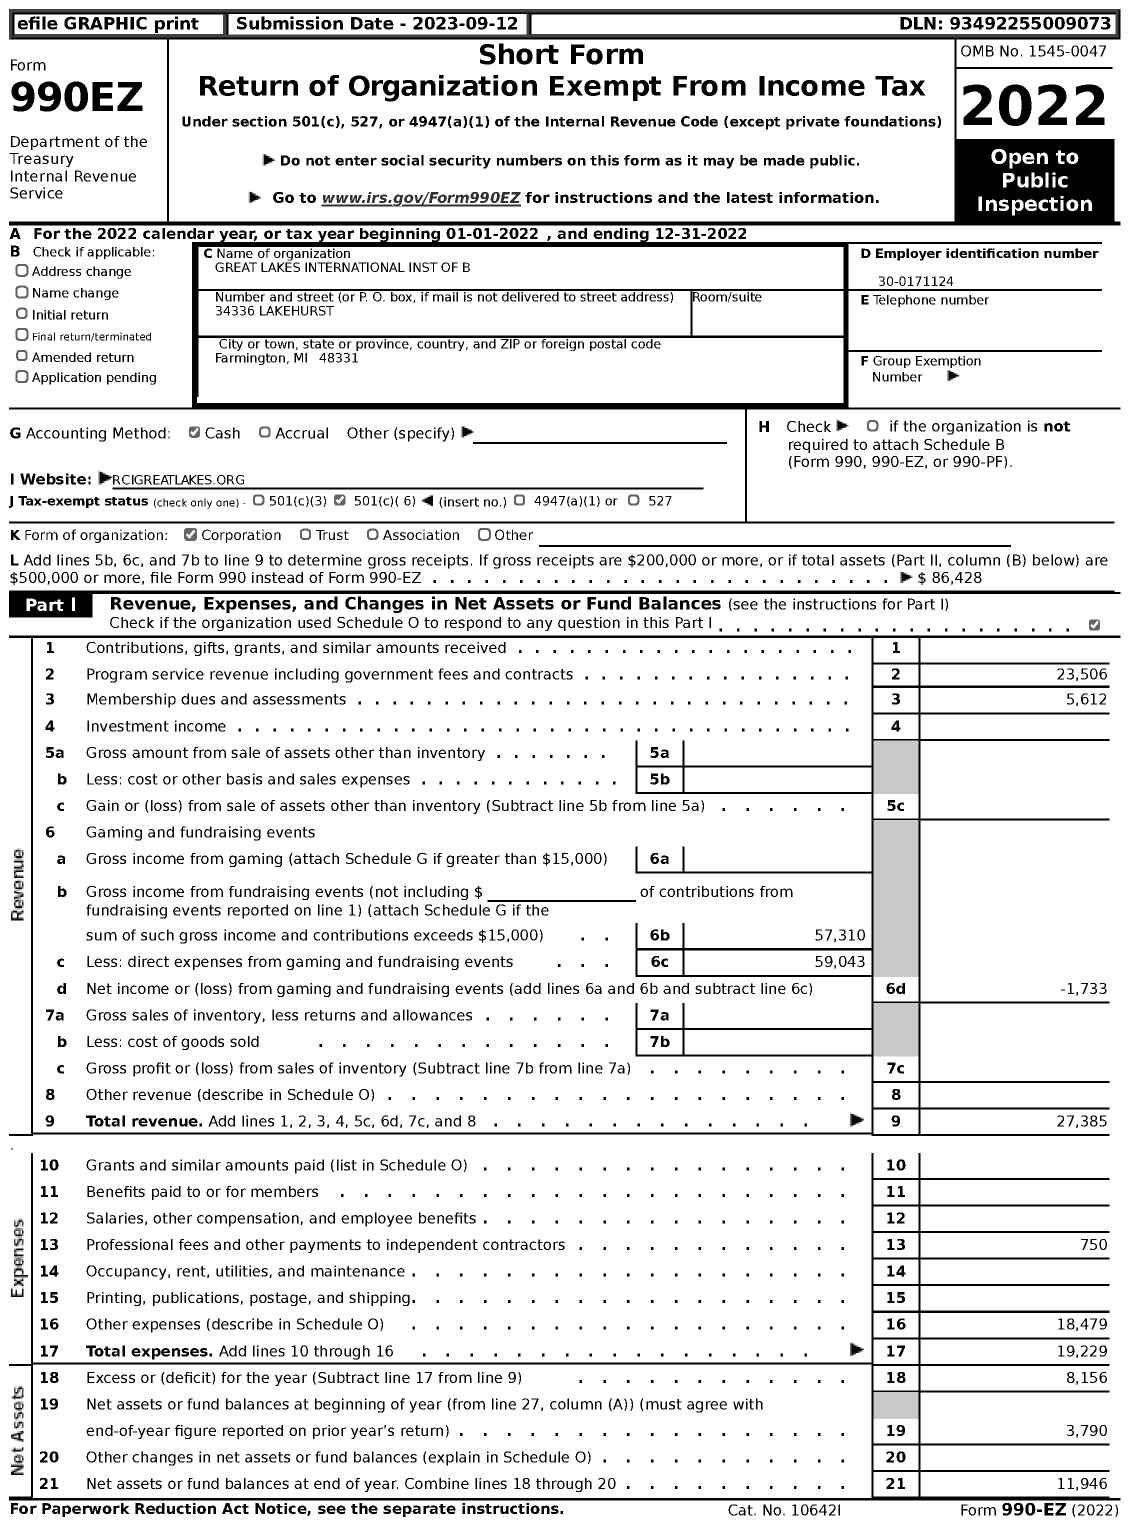 Image of first page of 2022 Form 990EZ for Great Lakes International Inst of B